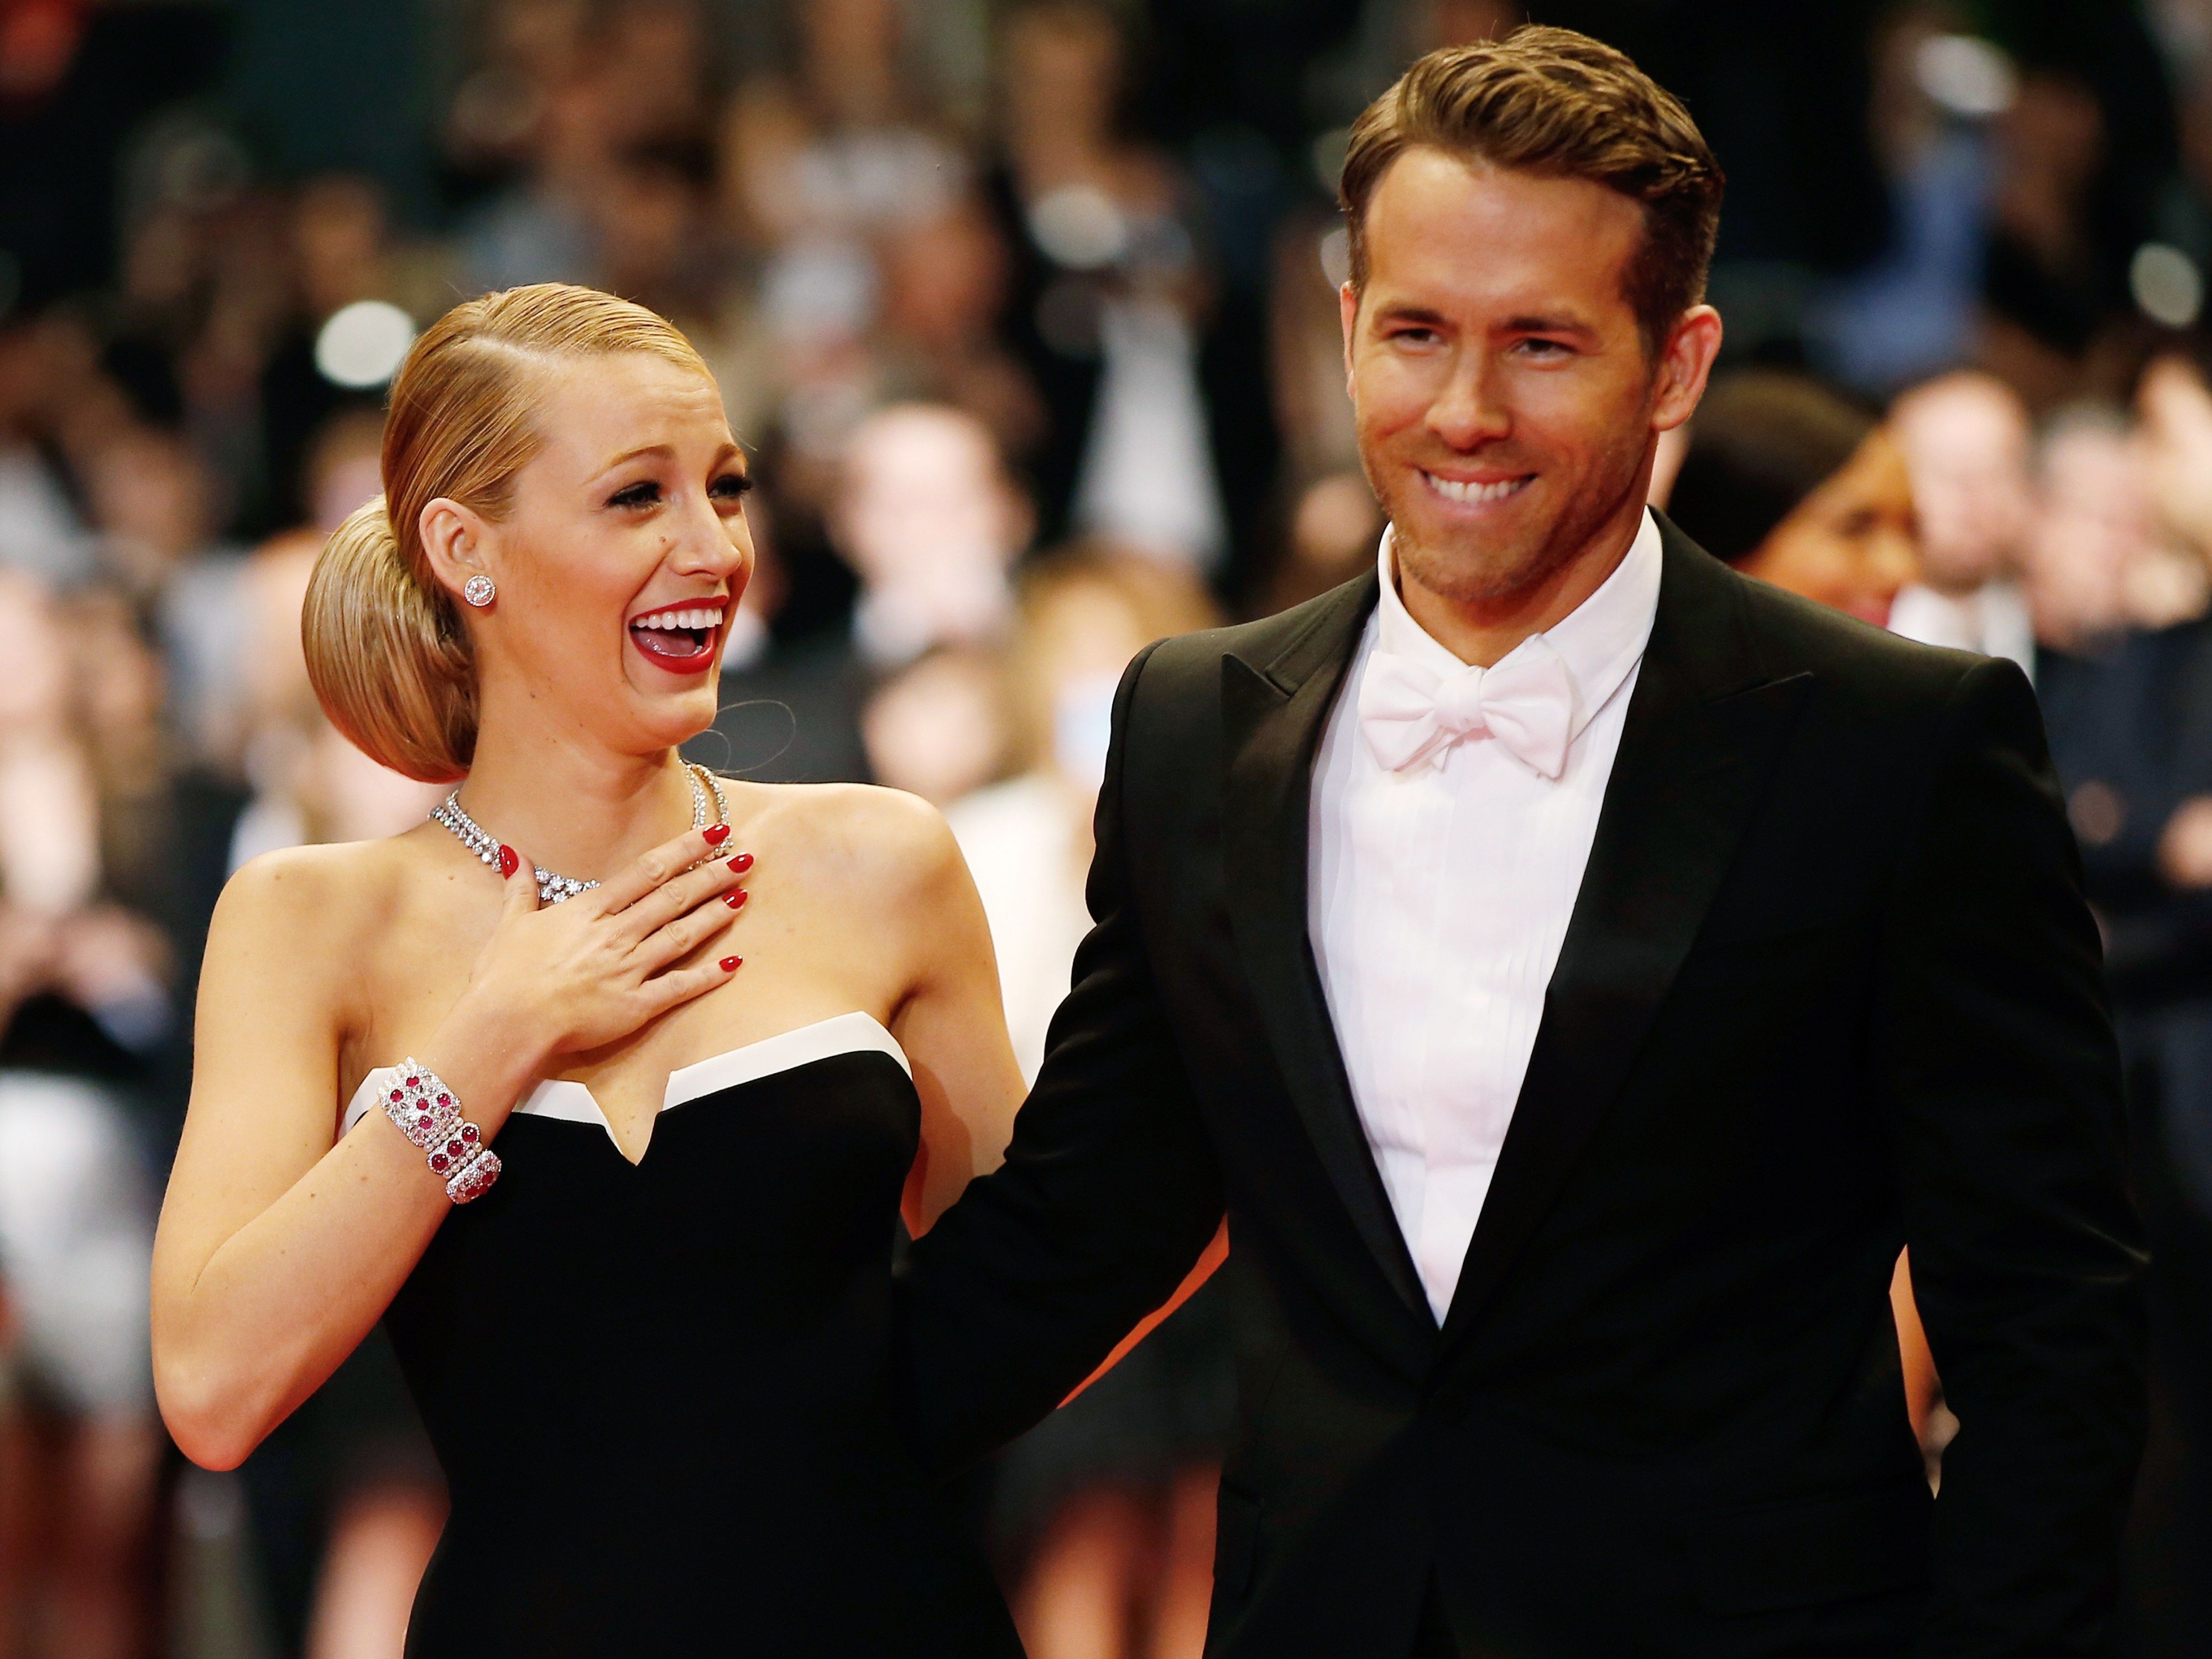 Blake Lively wearing a black dress and Ryan Reynolds wearing a black suit